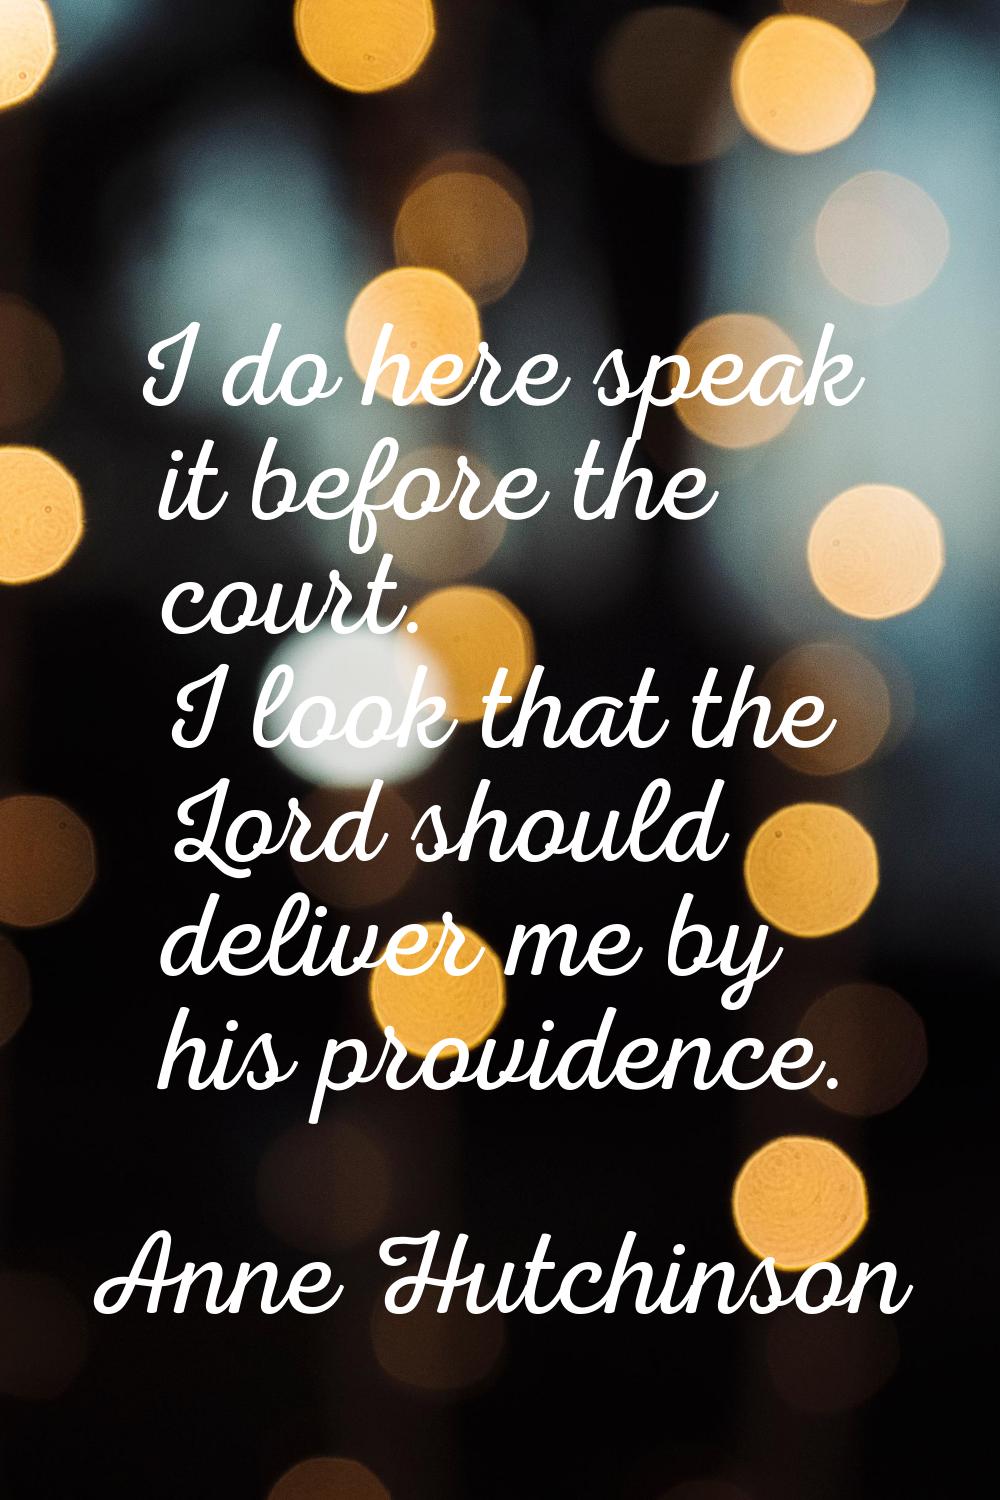 I do here speak it before the court. I look that the Lord should deliver me by his providence.